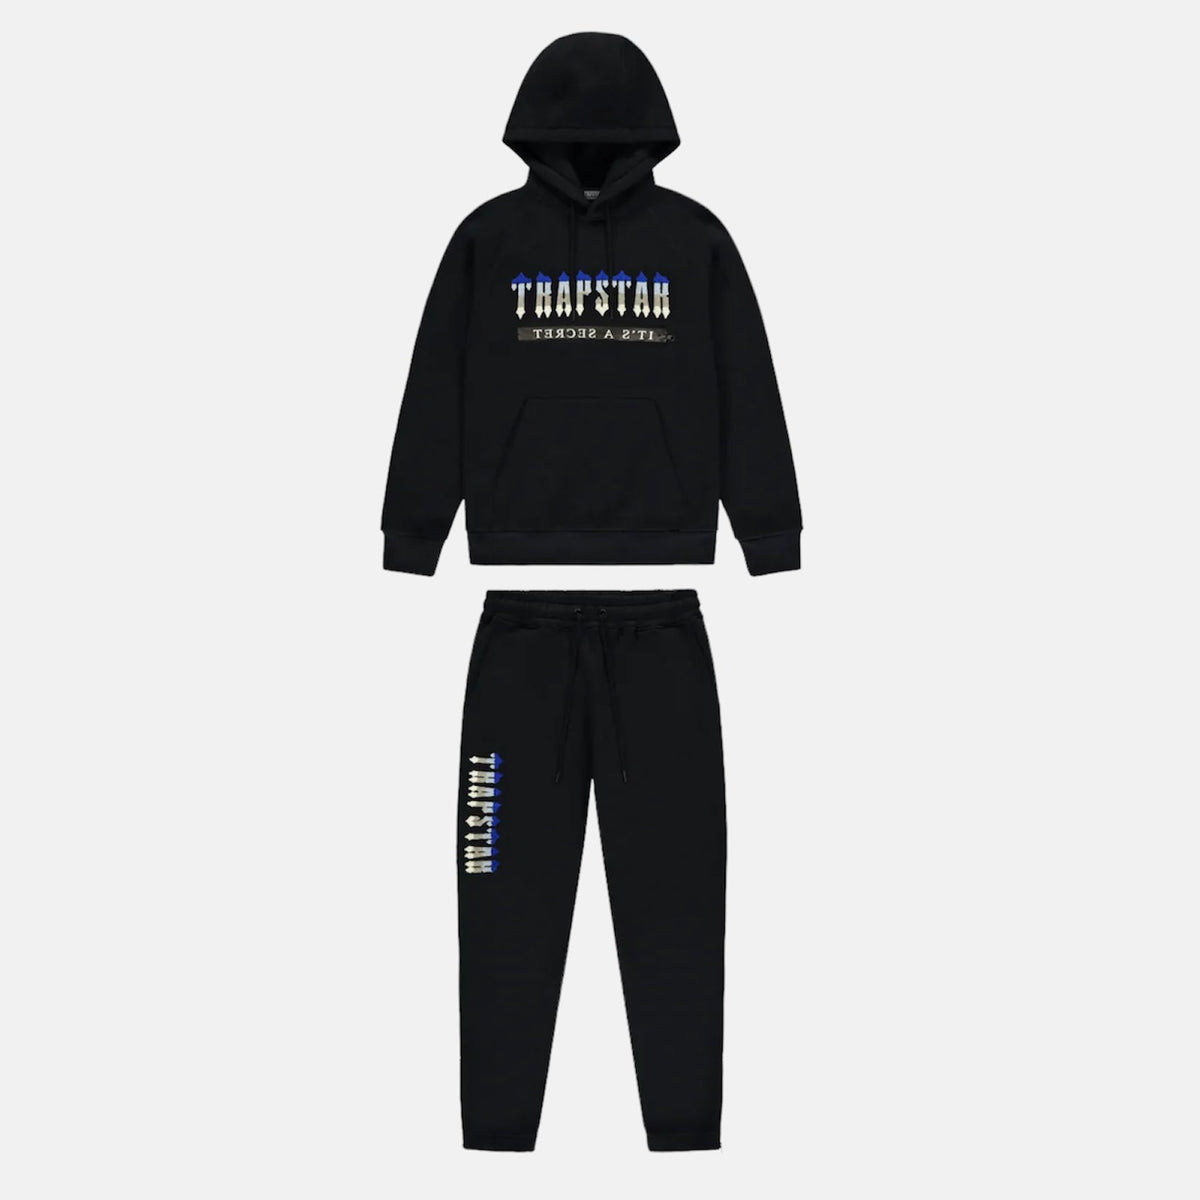 Trapstar Chenille Decoded 2.0 Hooded Tracksuit - Black Ice Edition - No Sauce The Plug